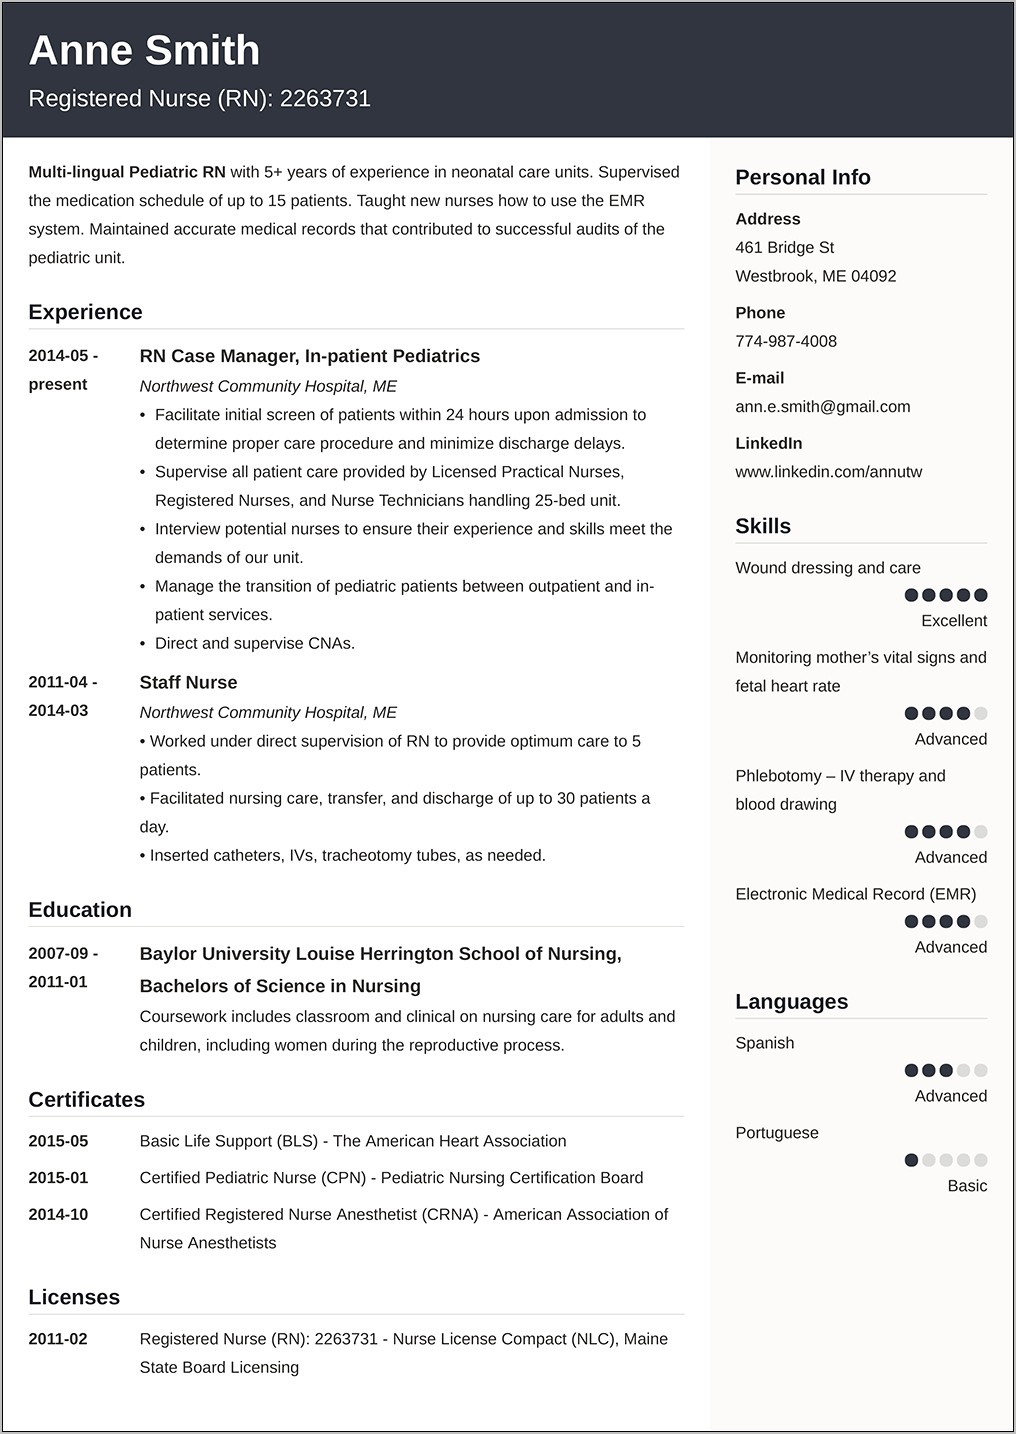 Best Format For A Professional Resume